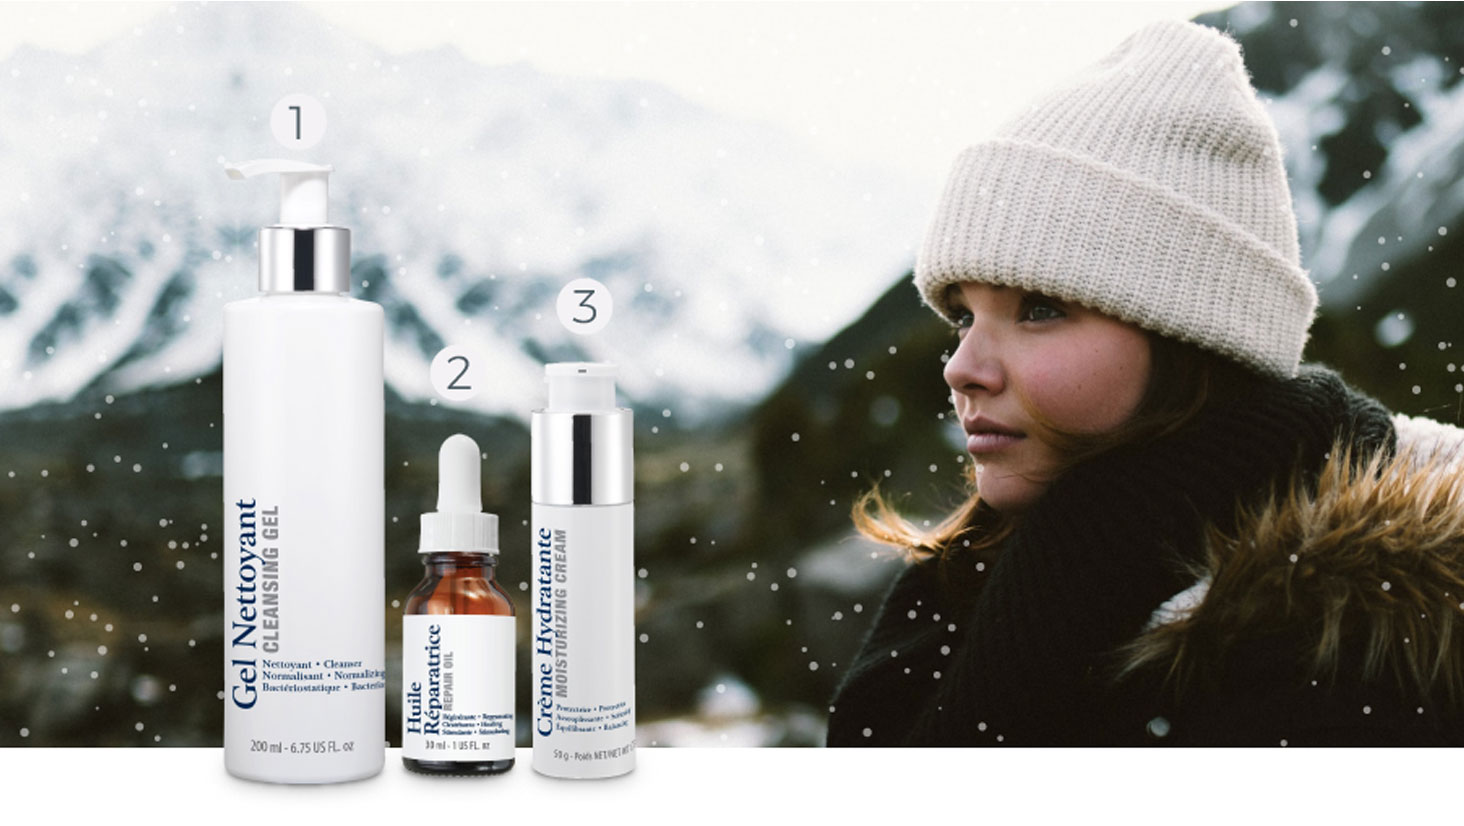 Glow With Our Winter Skin Care Formulas!